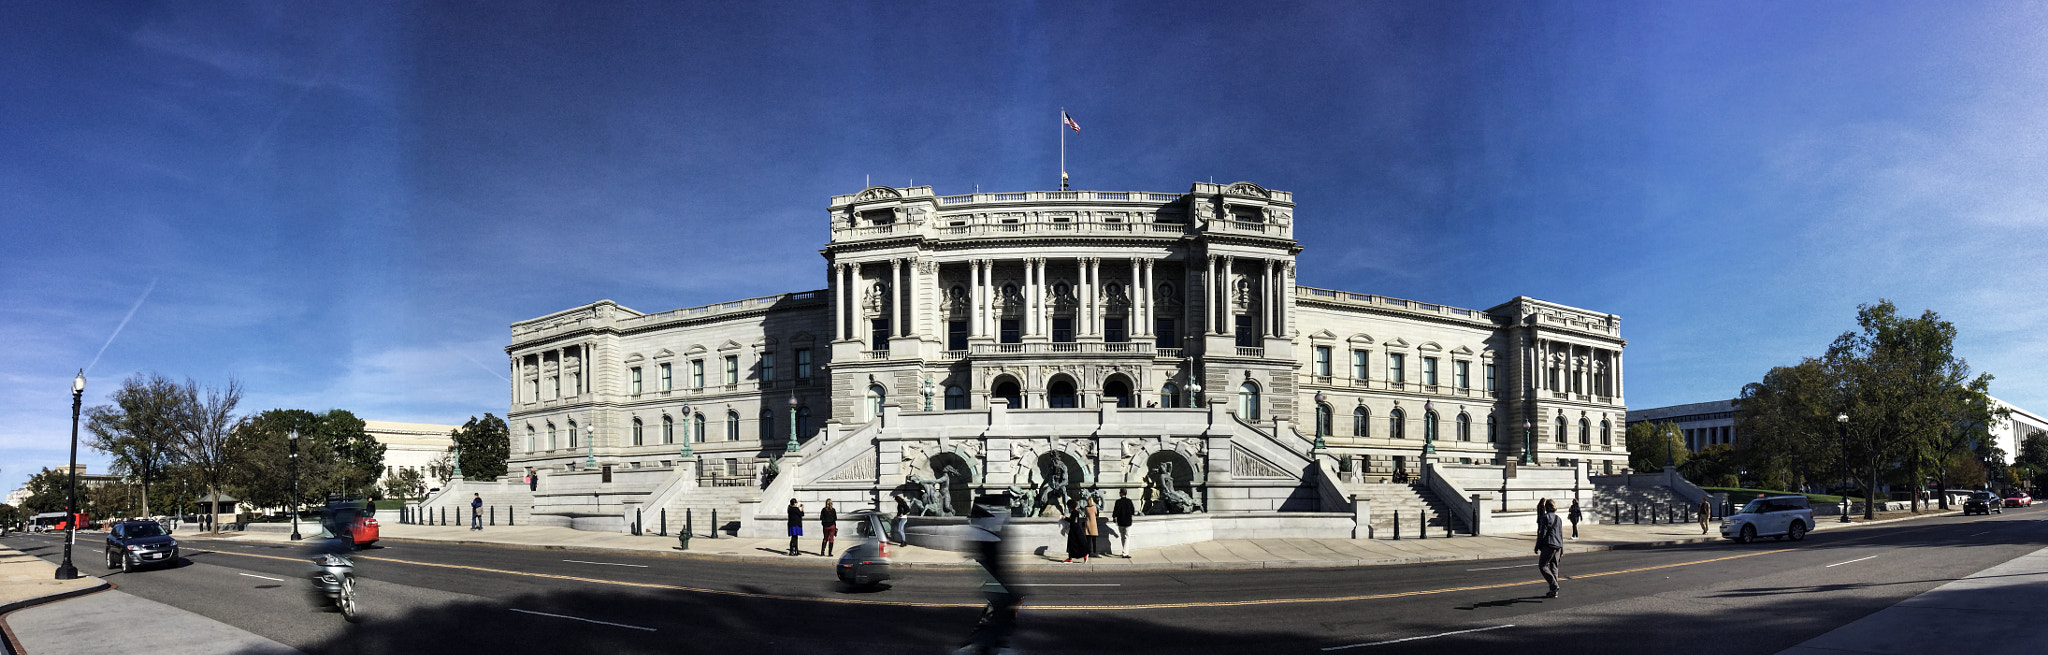 Apple iPad Air 2 sample photo. The library of congress photography